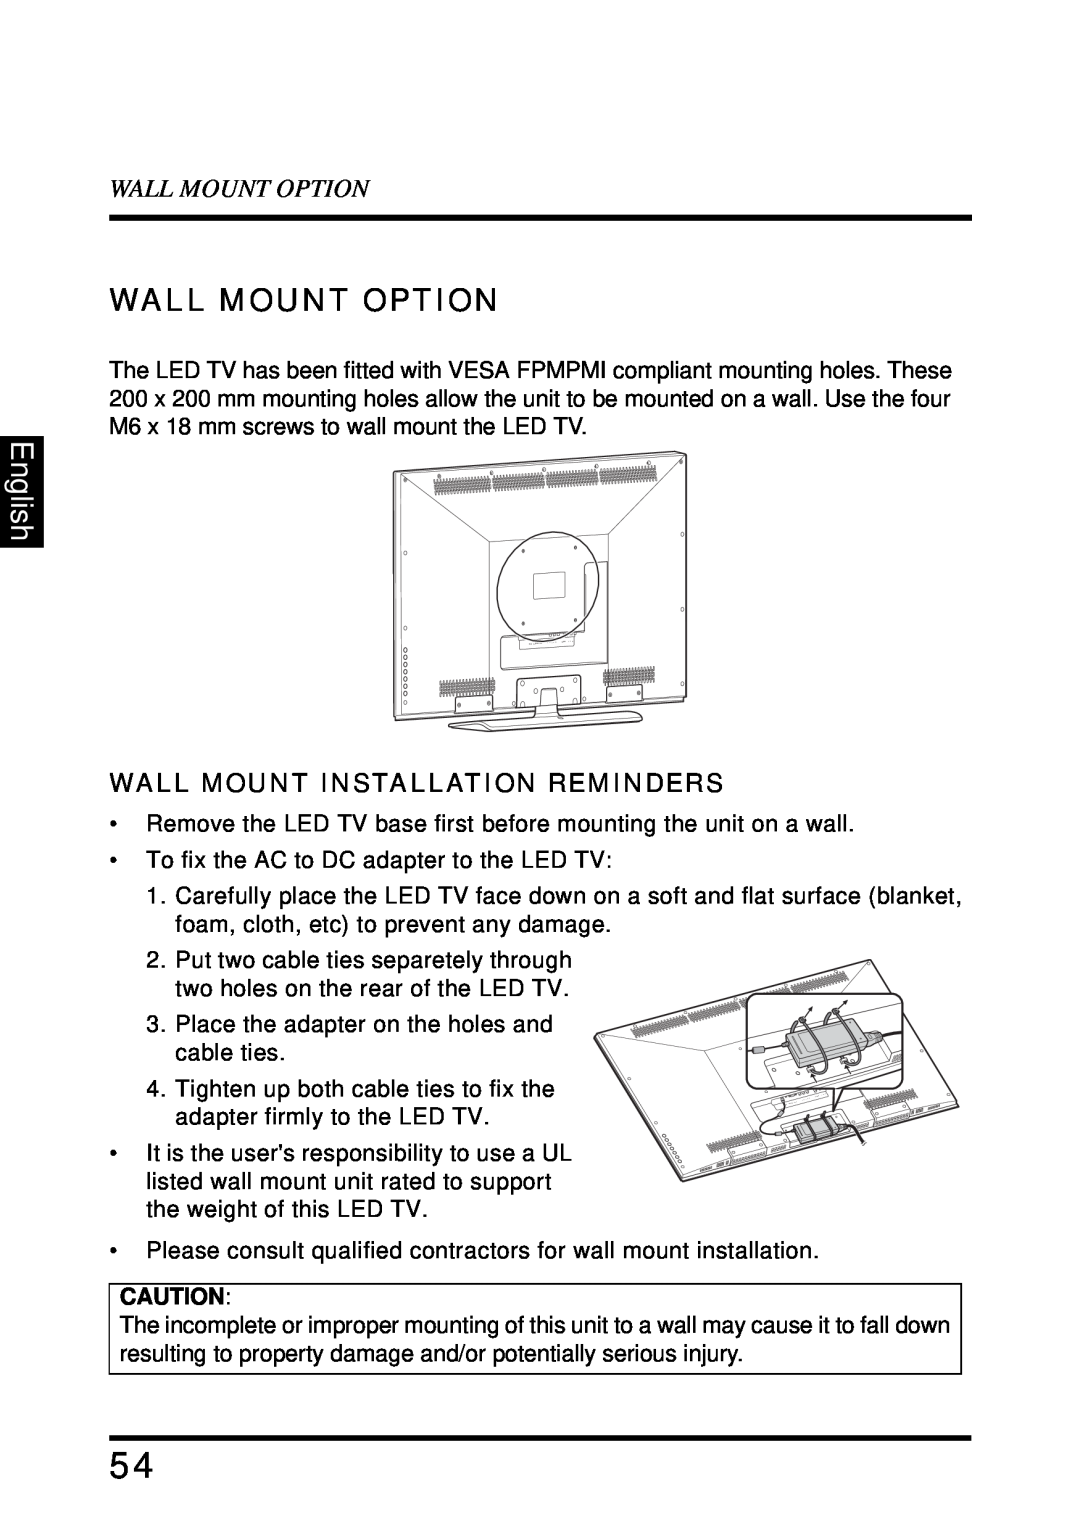 Westinghouse LD-4680 user manual Wall Mount Option, English, Wall Mount Installation Reminders 